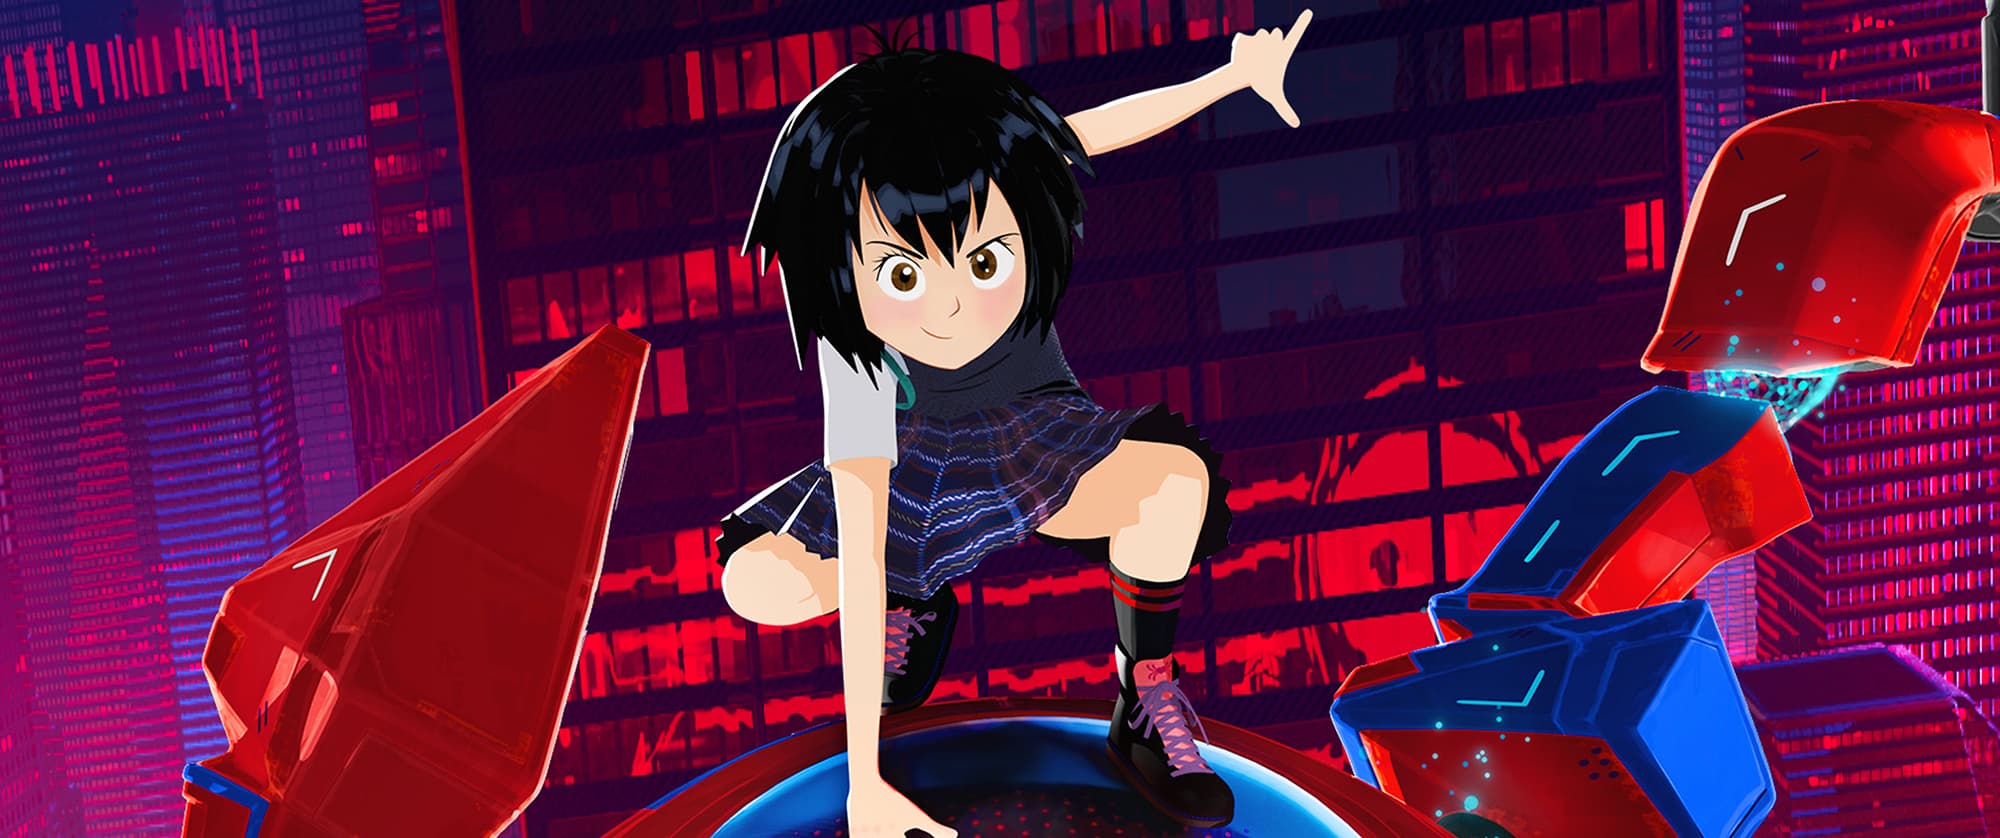 Peni Parker in "Spider-Man: Into the Spider-Verse"